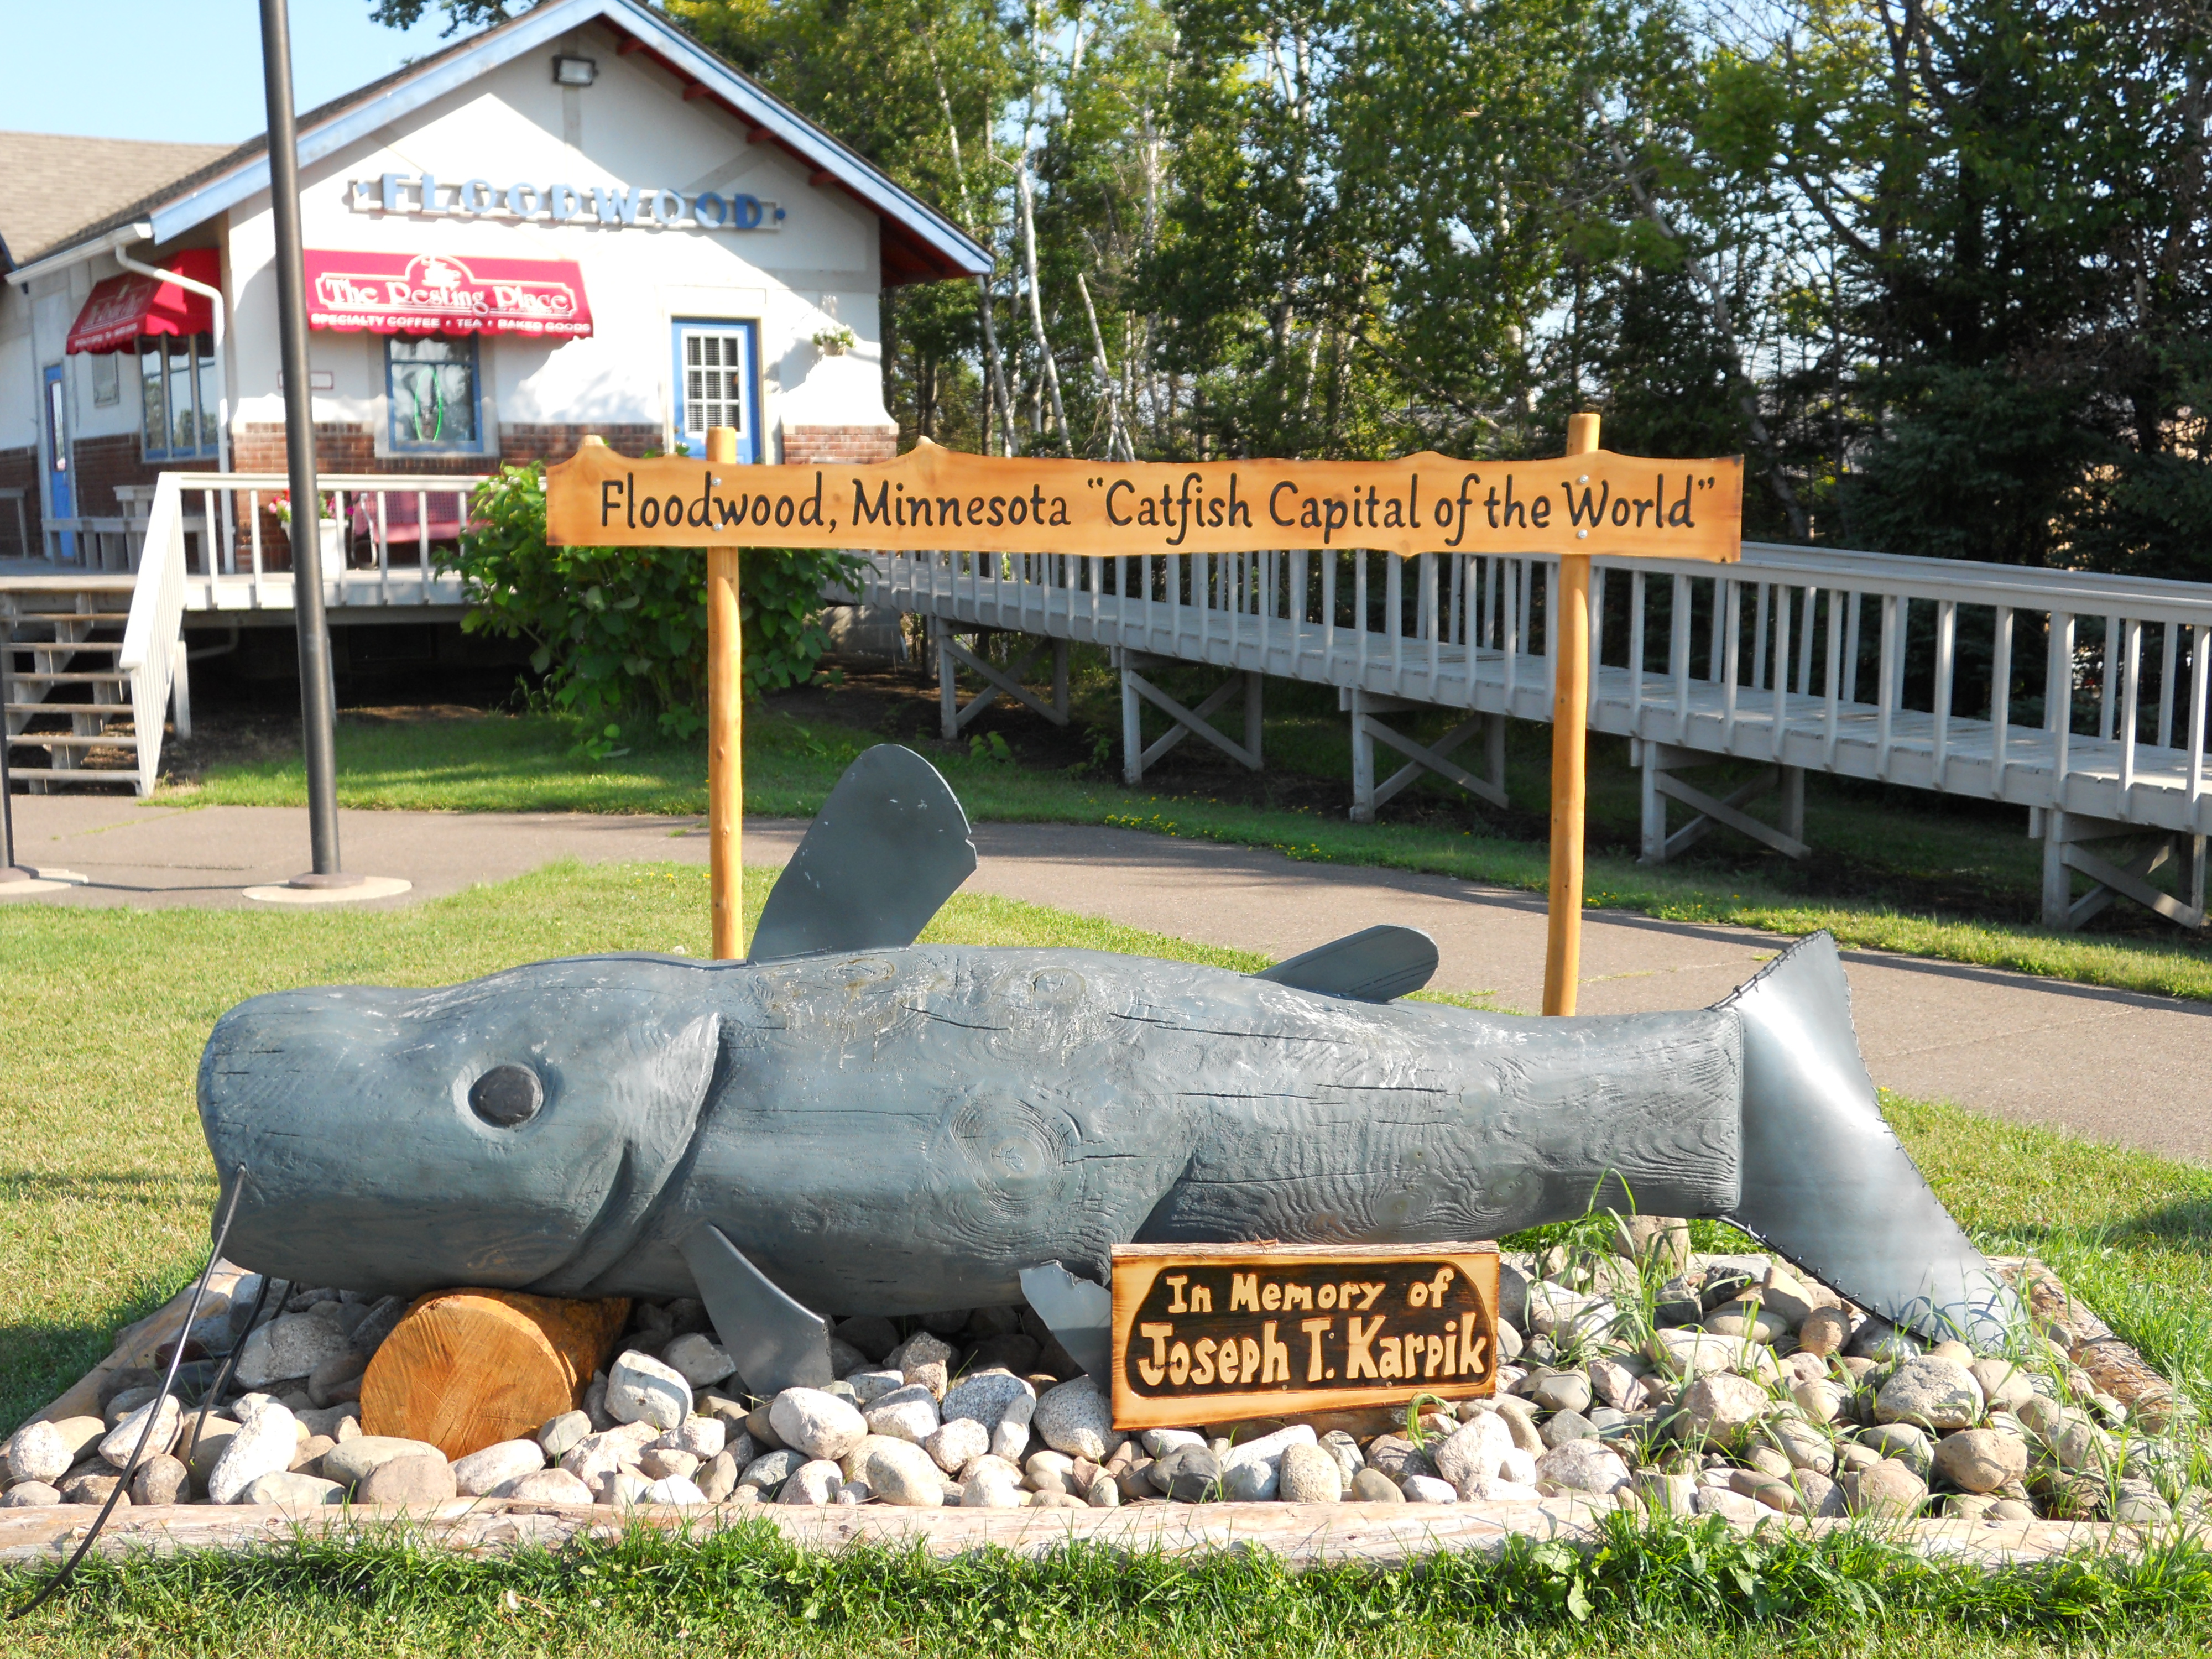 "Catfish Capital of the World" Floodwood, Minnesota. Catfish statue welcoming visitors to town.